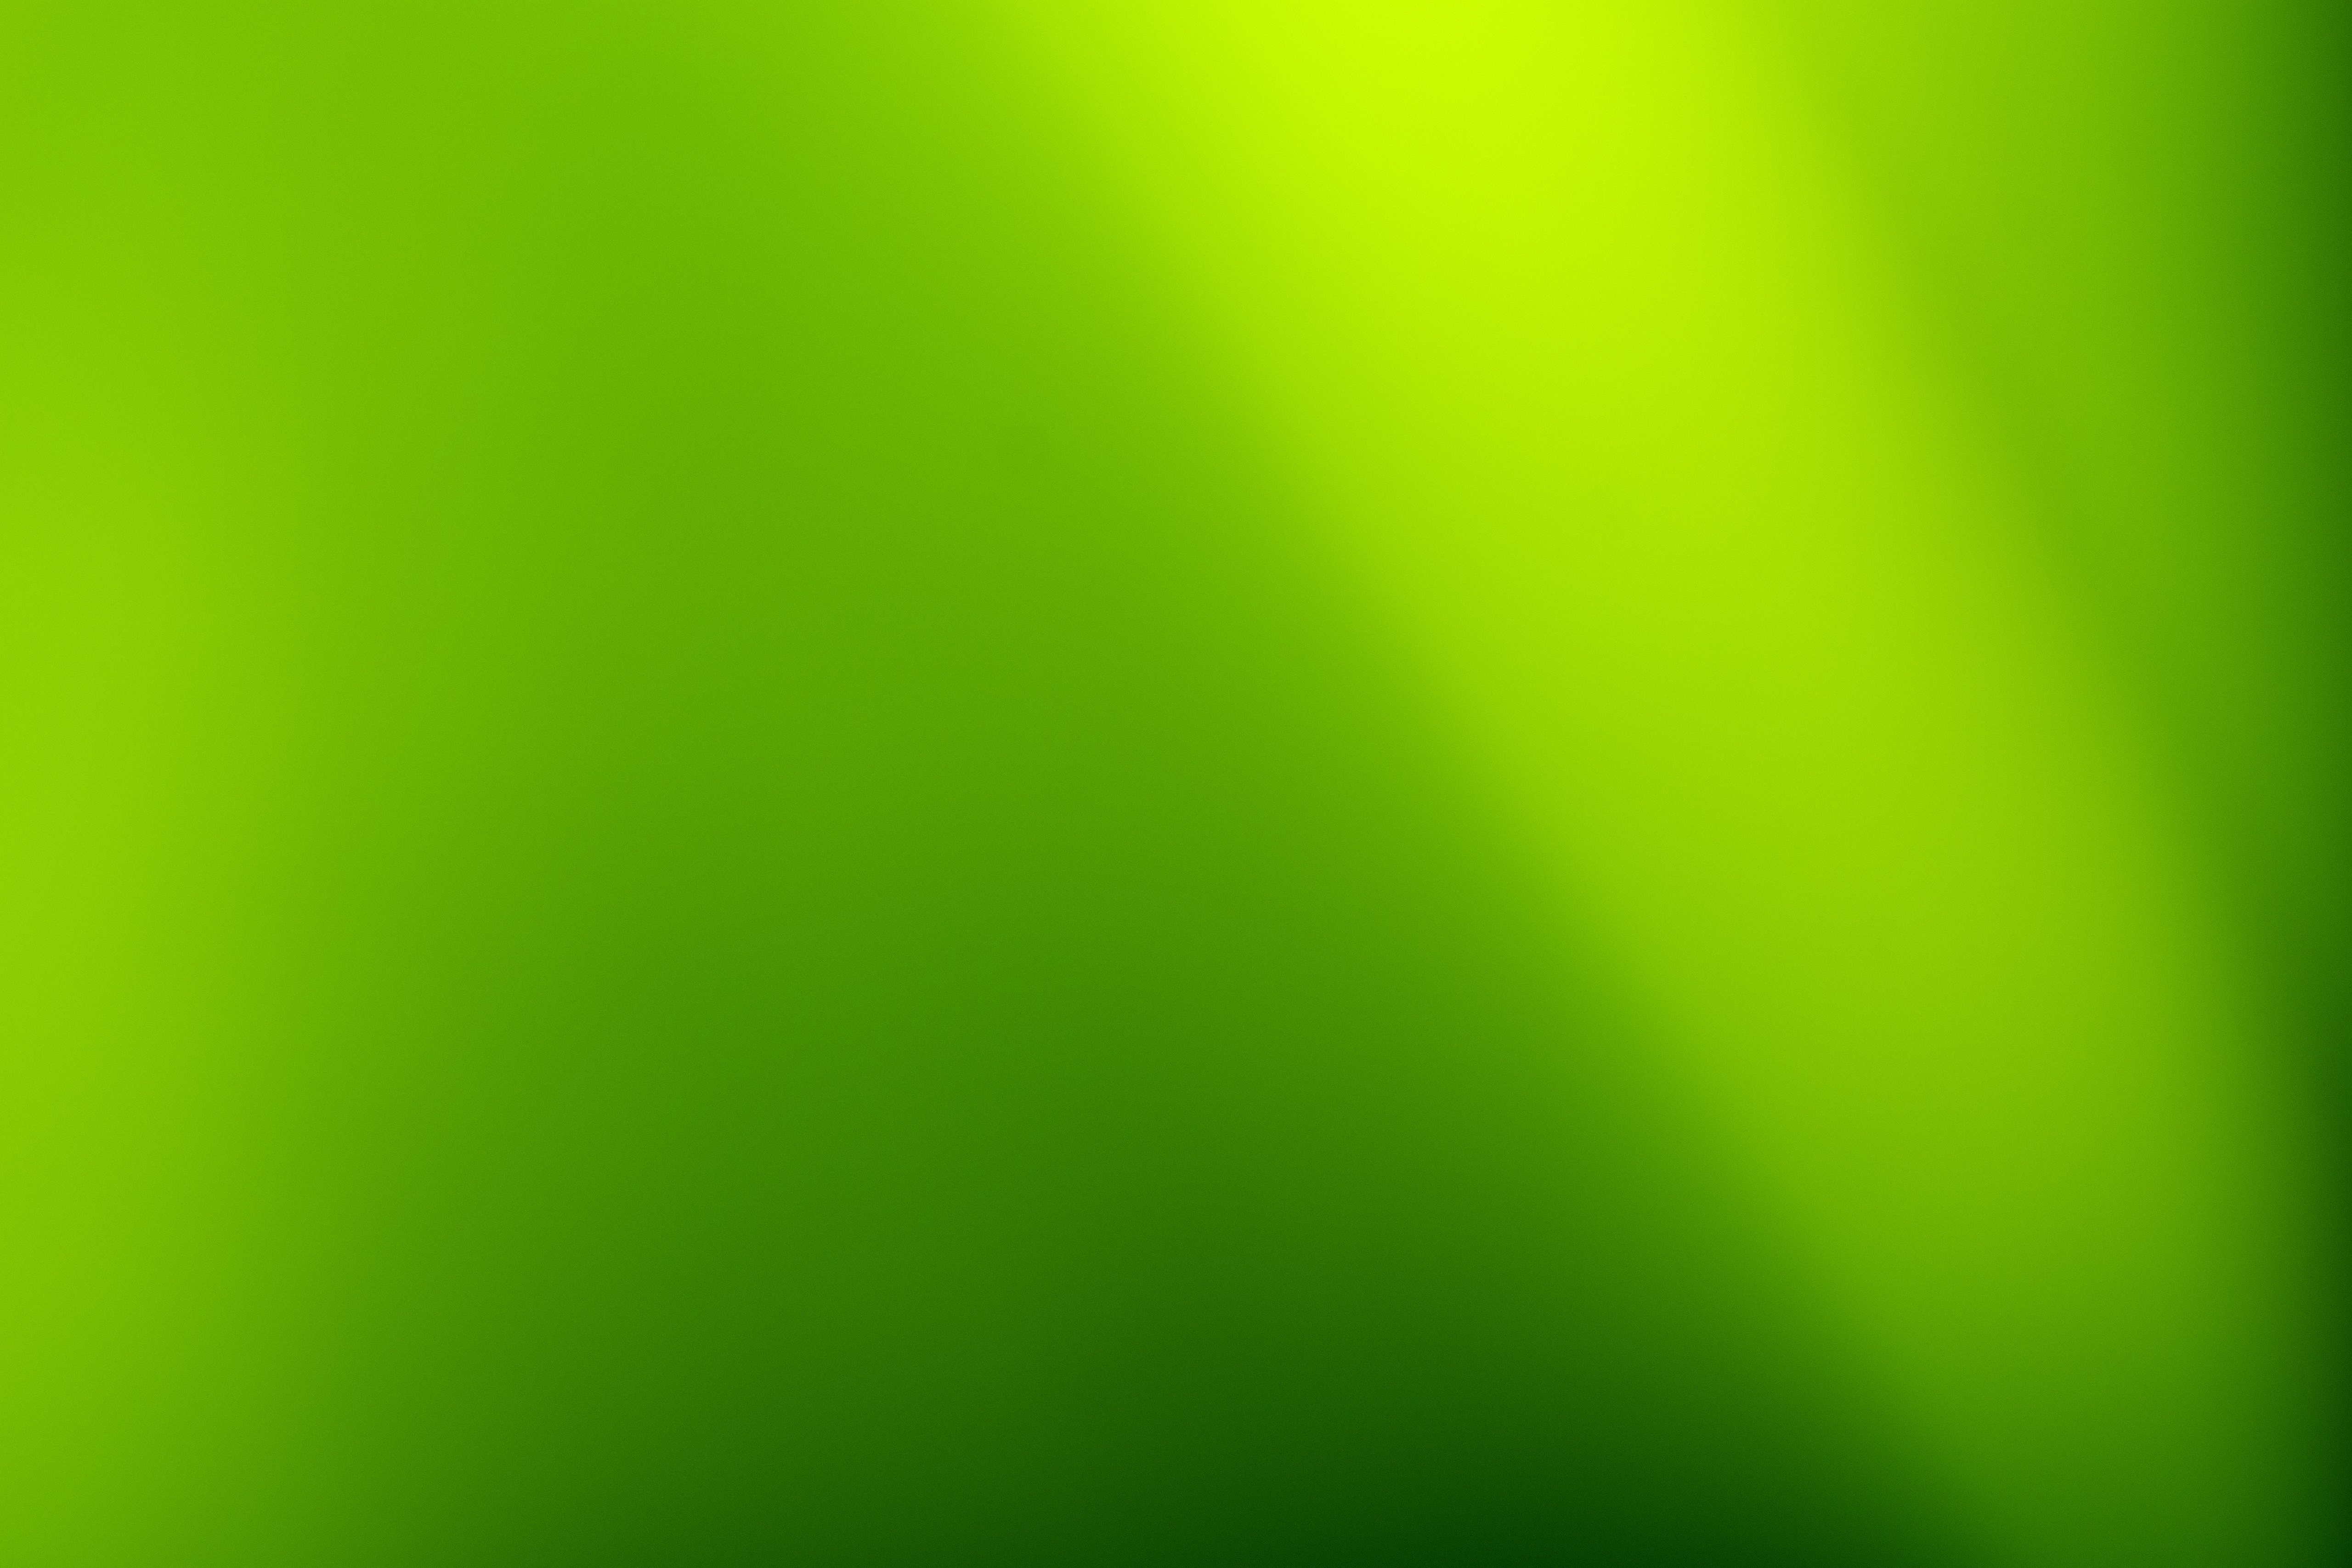 green, color, smooth, background, gradient, abstract, blur iphone wallpaper